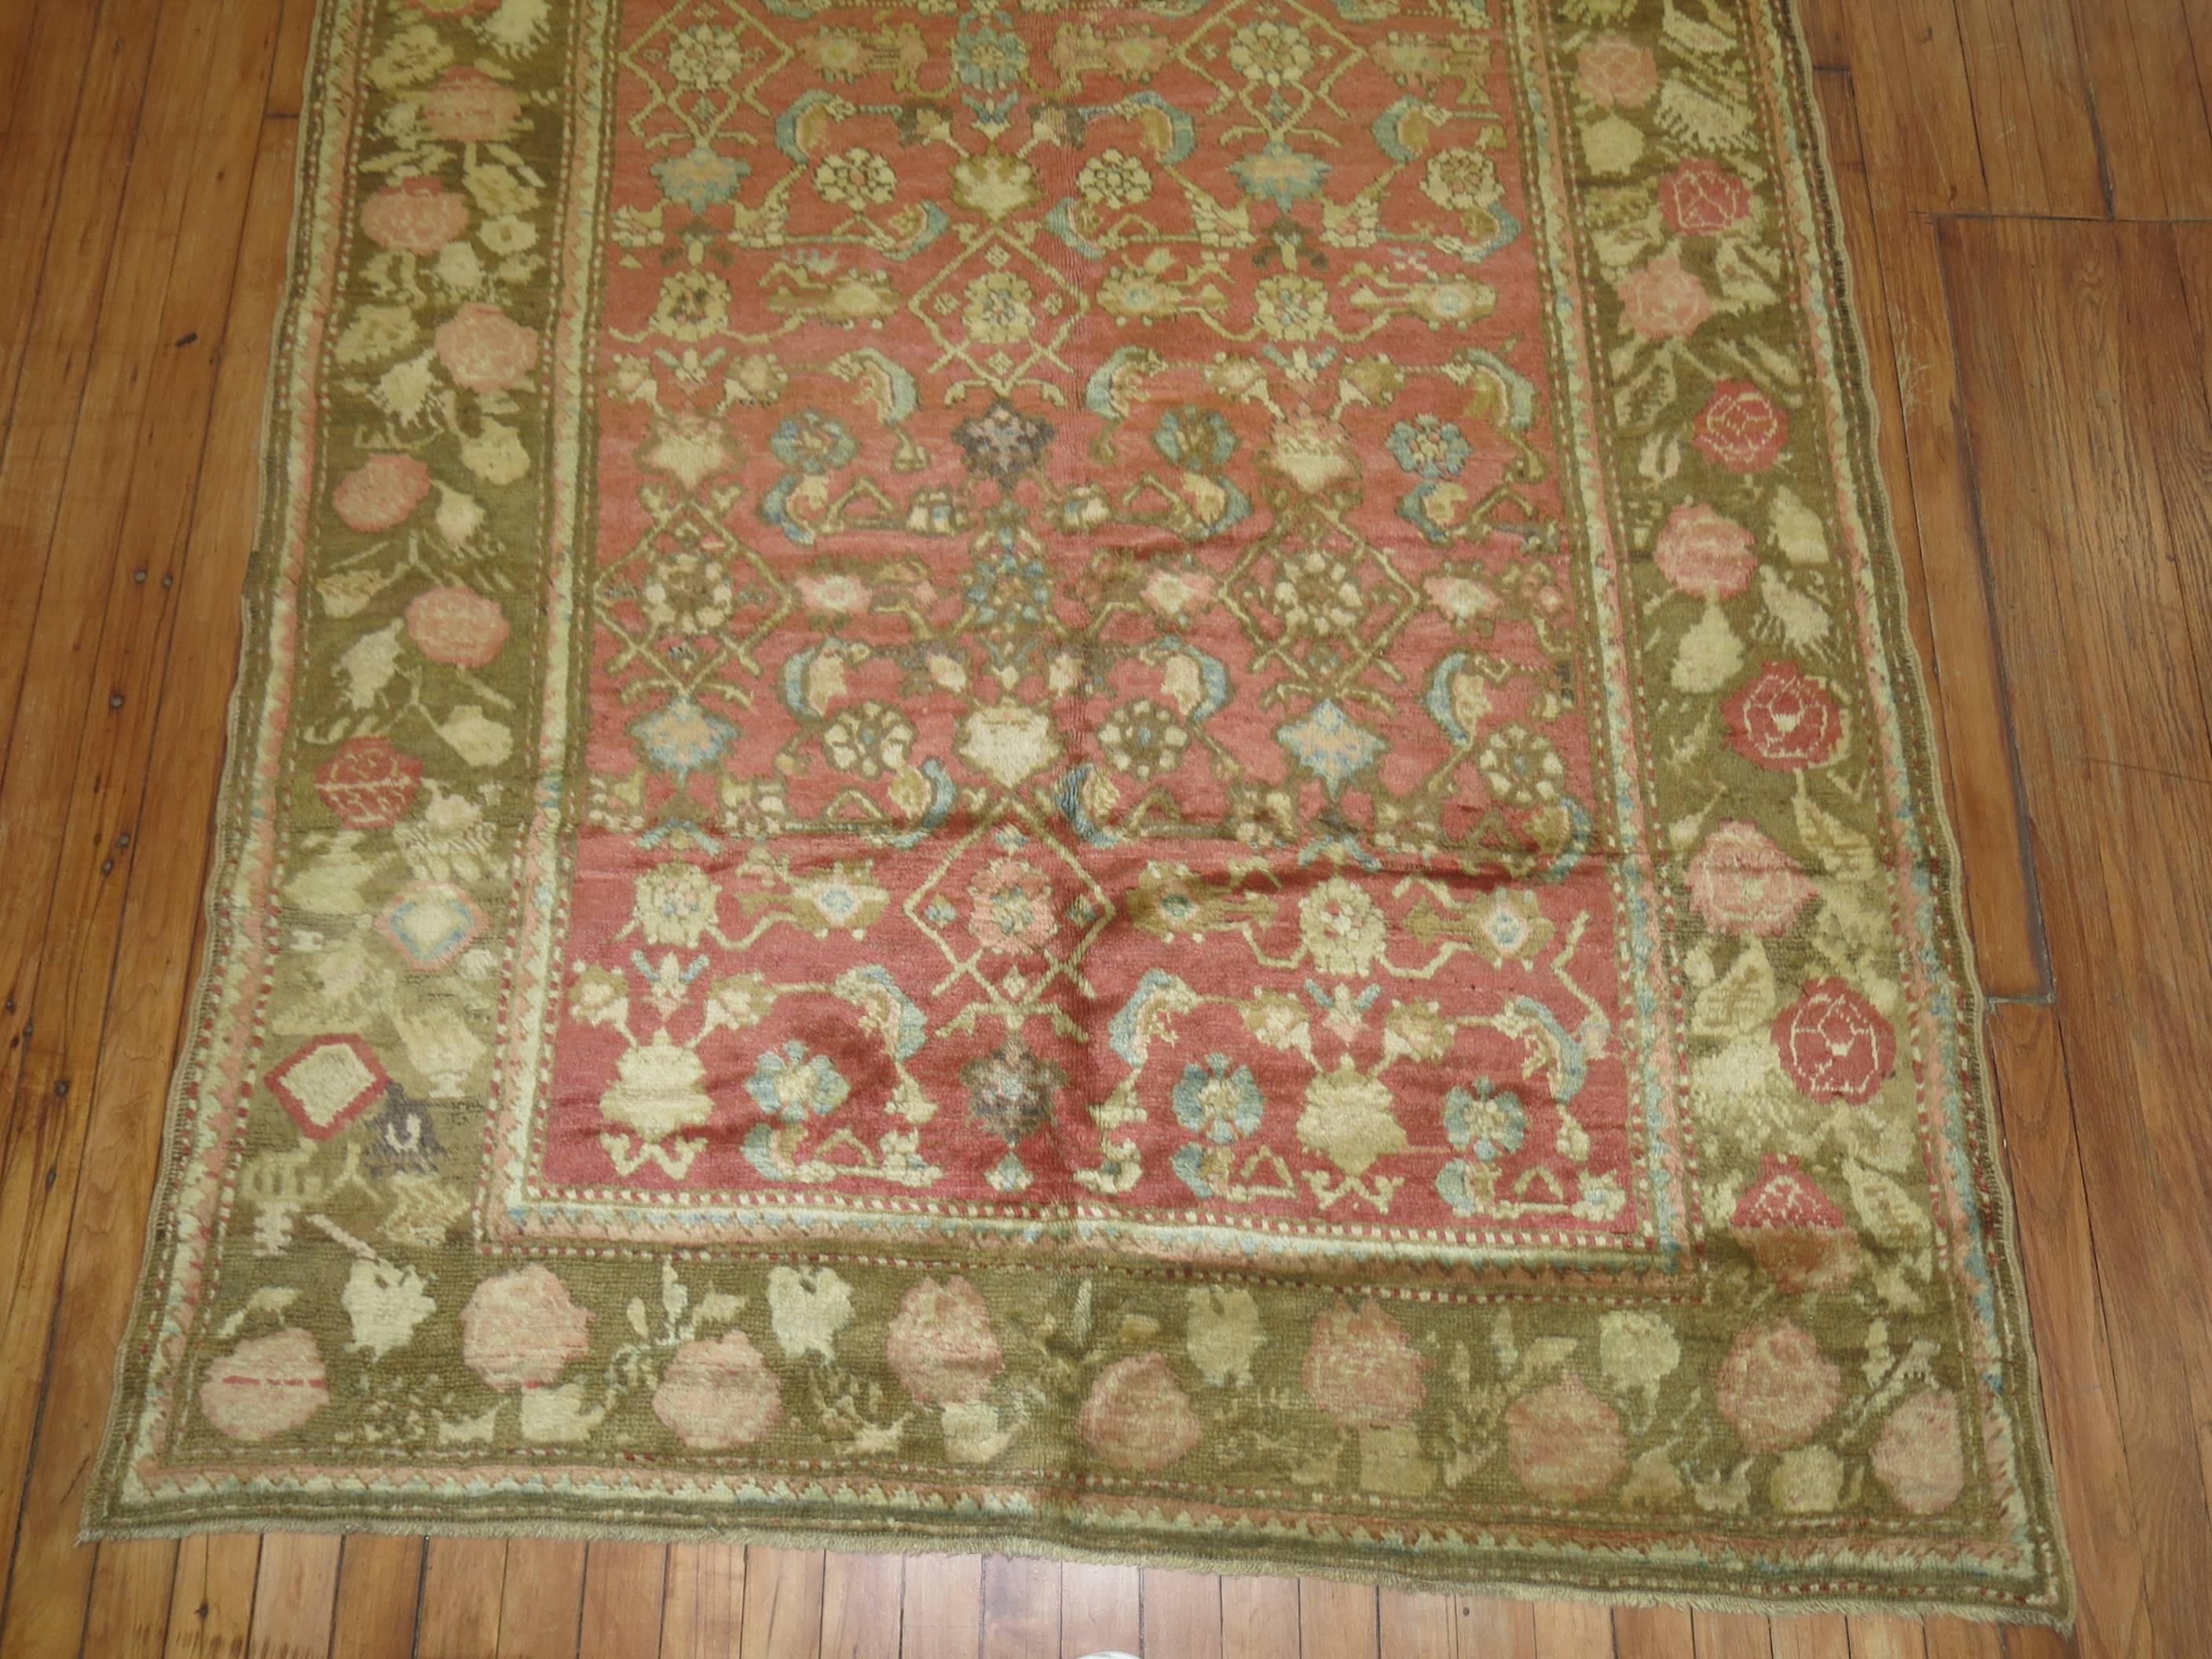 Plush pile Karabagh rug with an all-over Herati and floral design on a salmon colored field and a floral border in soft brown/ some accents in light blue sparkled in the field and border too.